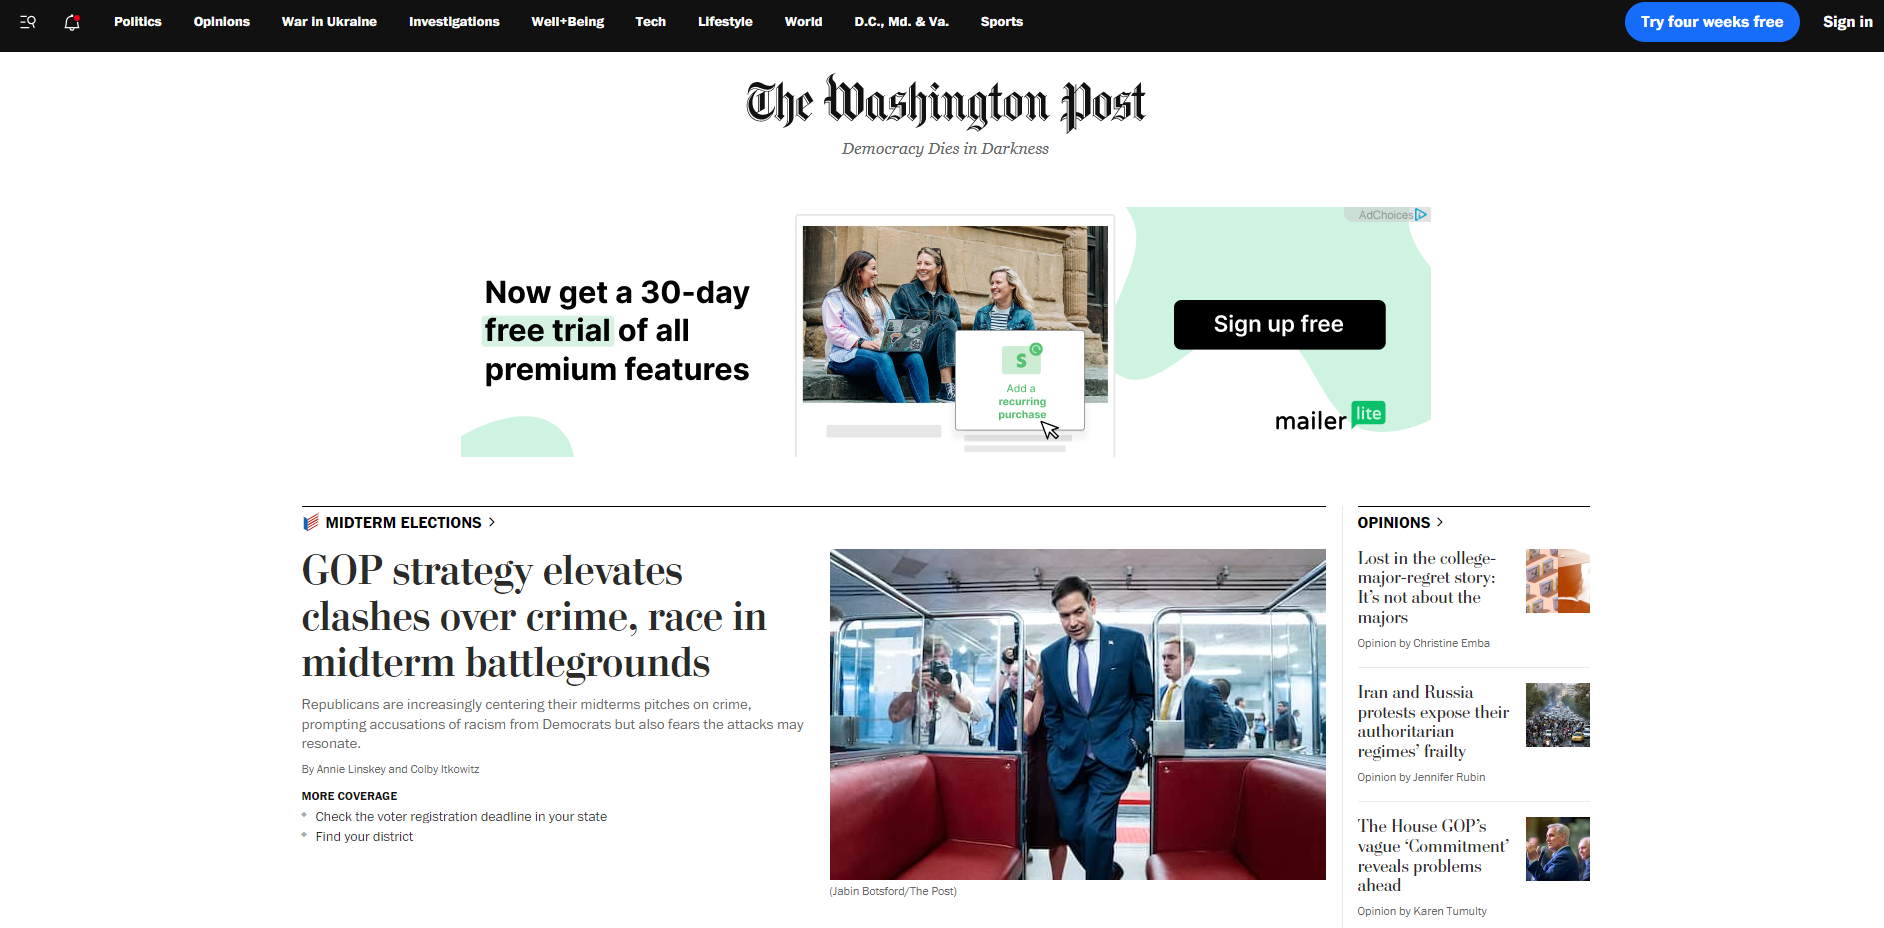 Washington Post Try four weeks free. Then $4 (was $9) Cancel anytime